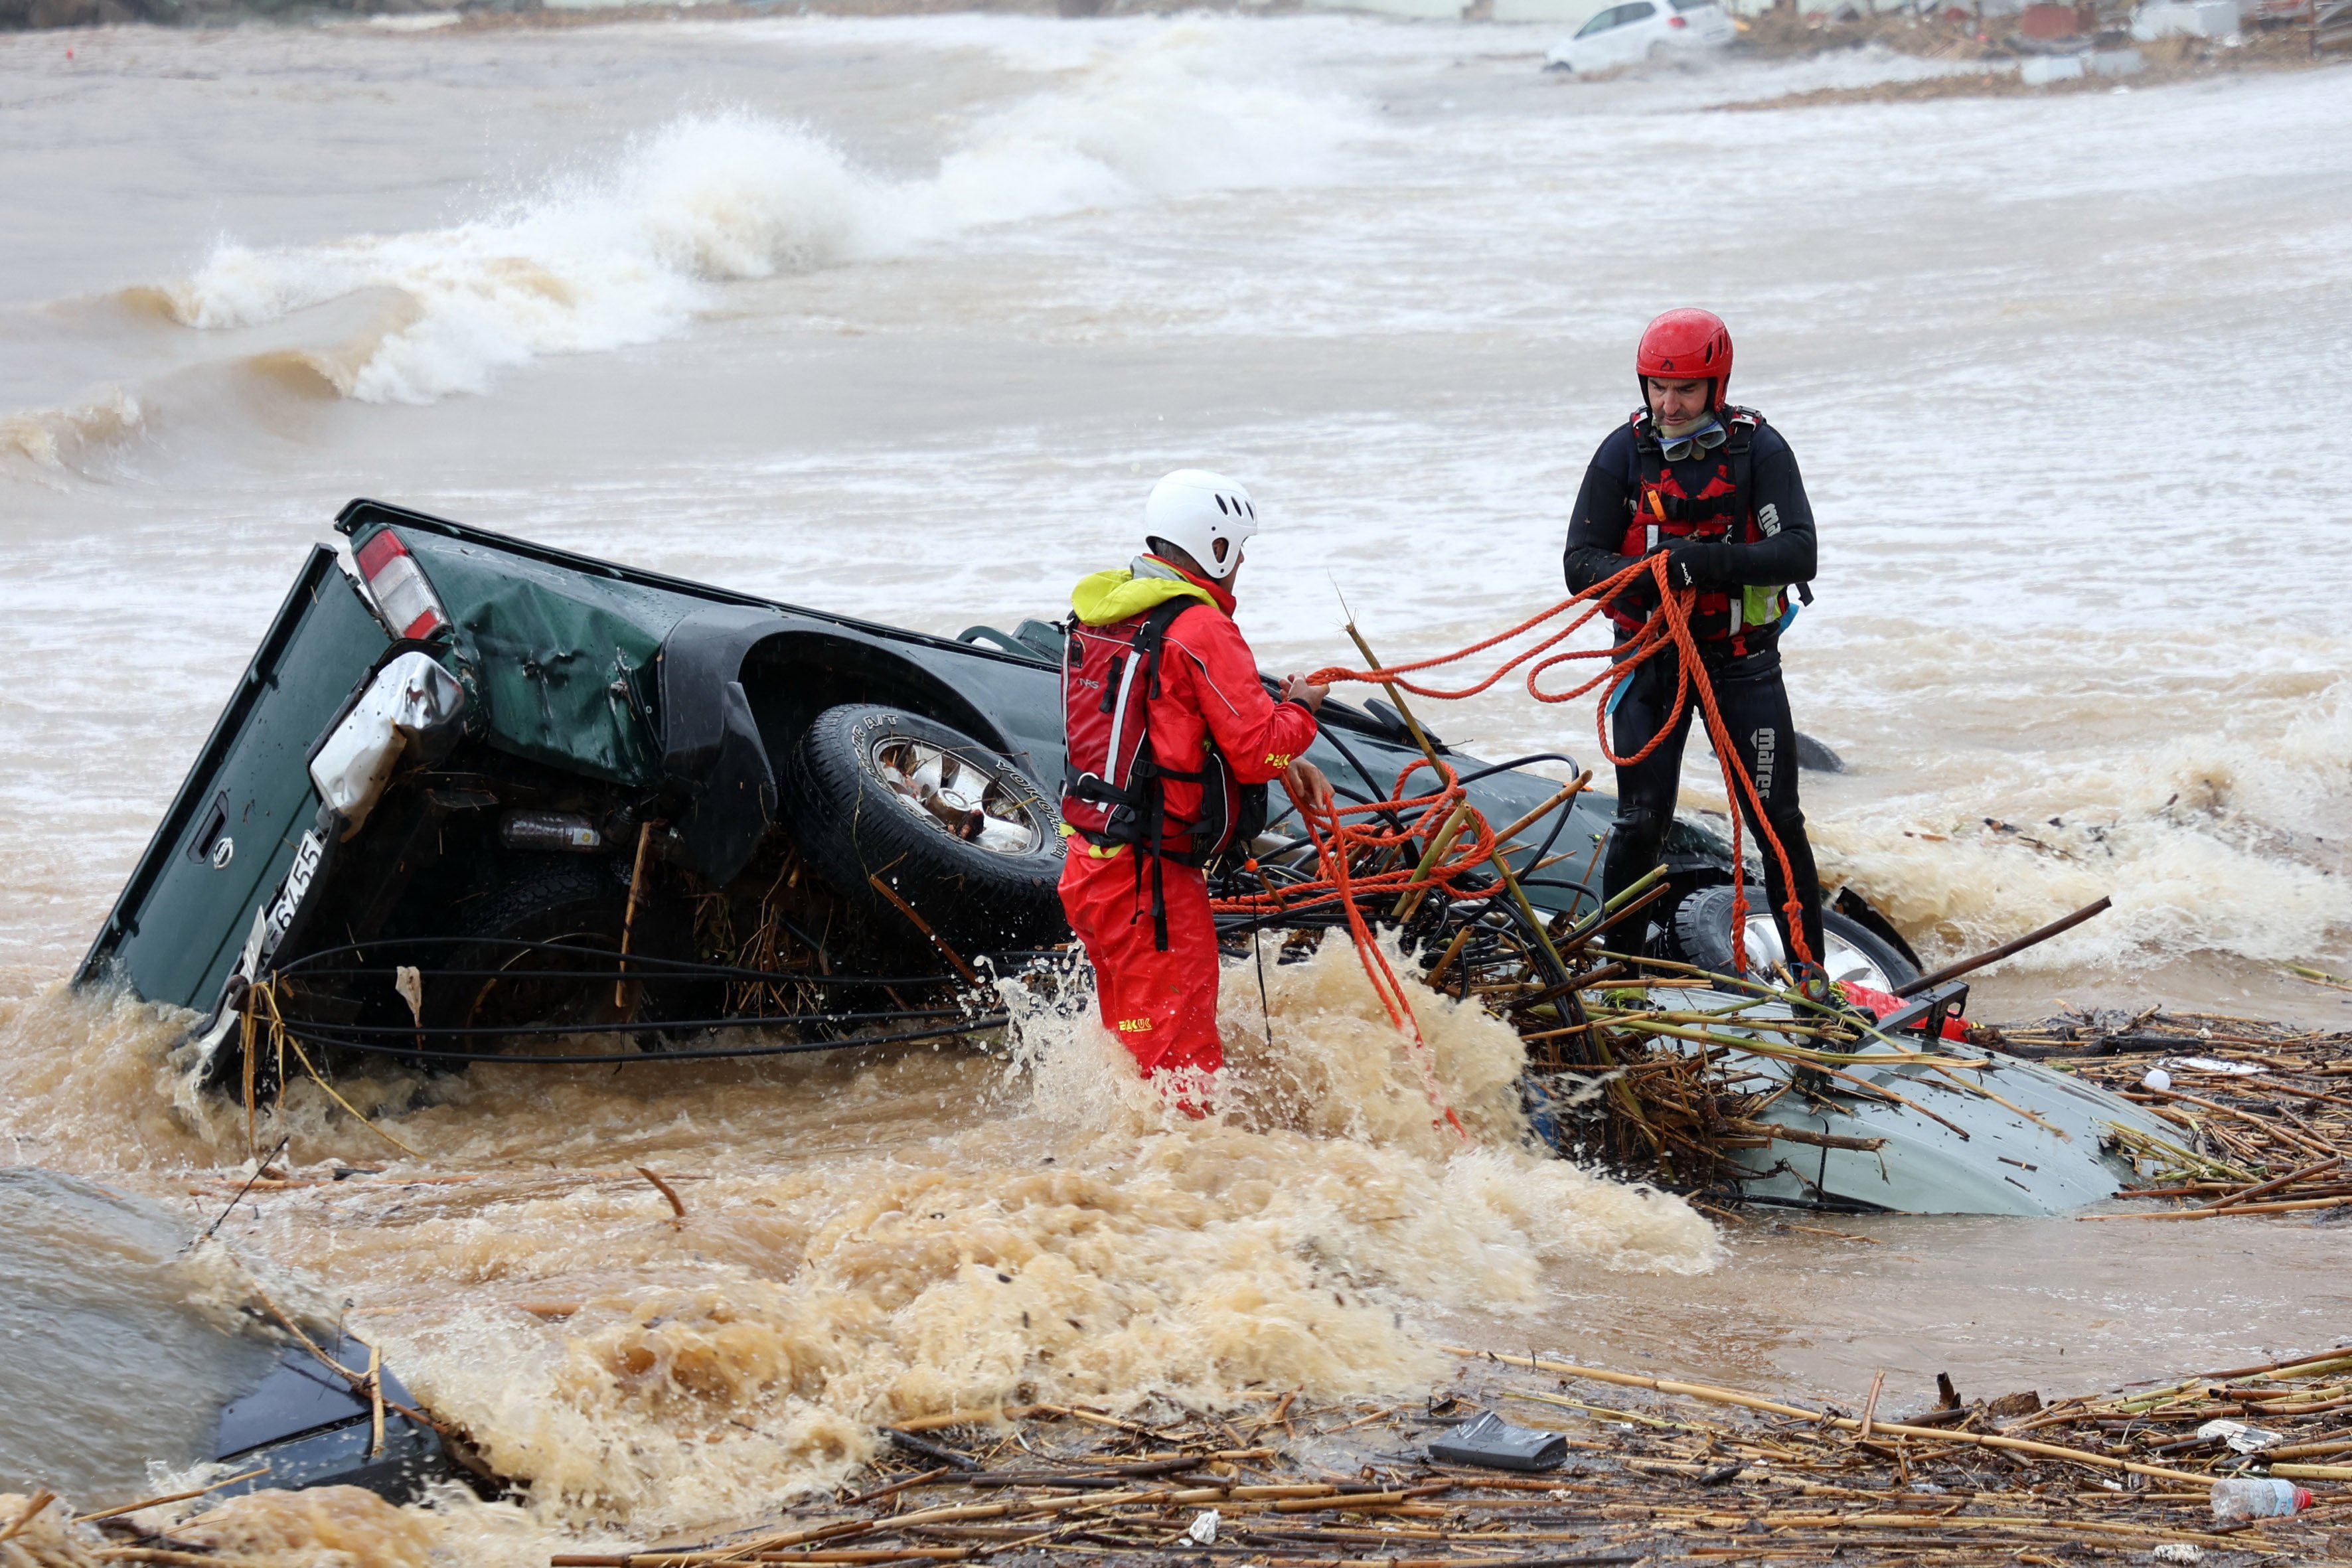 Rescuers try to retrieve a vehicle pushed by flood waters into the sea along the beach of the resort of Agia Pelagia, on the Greek island of Crete following flash floods on Saturday. Photo: AFP